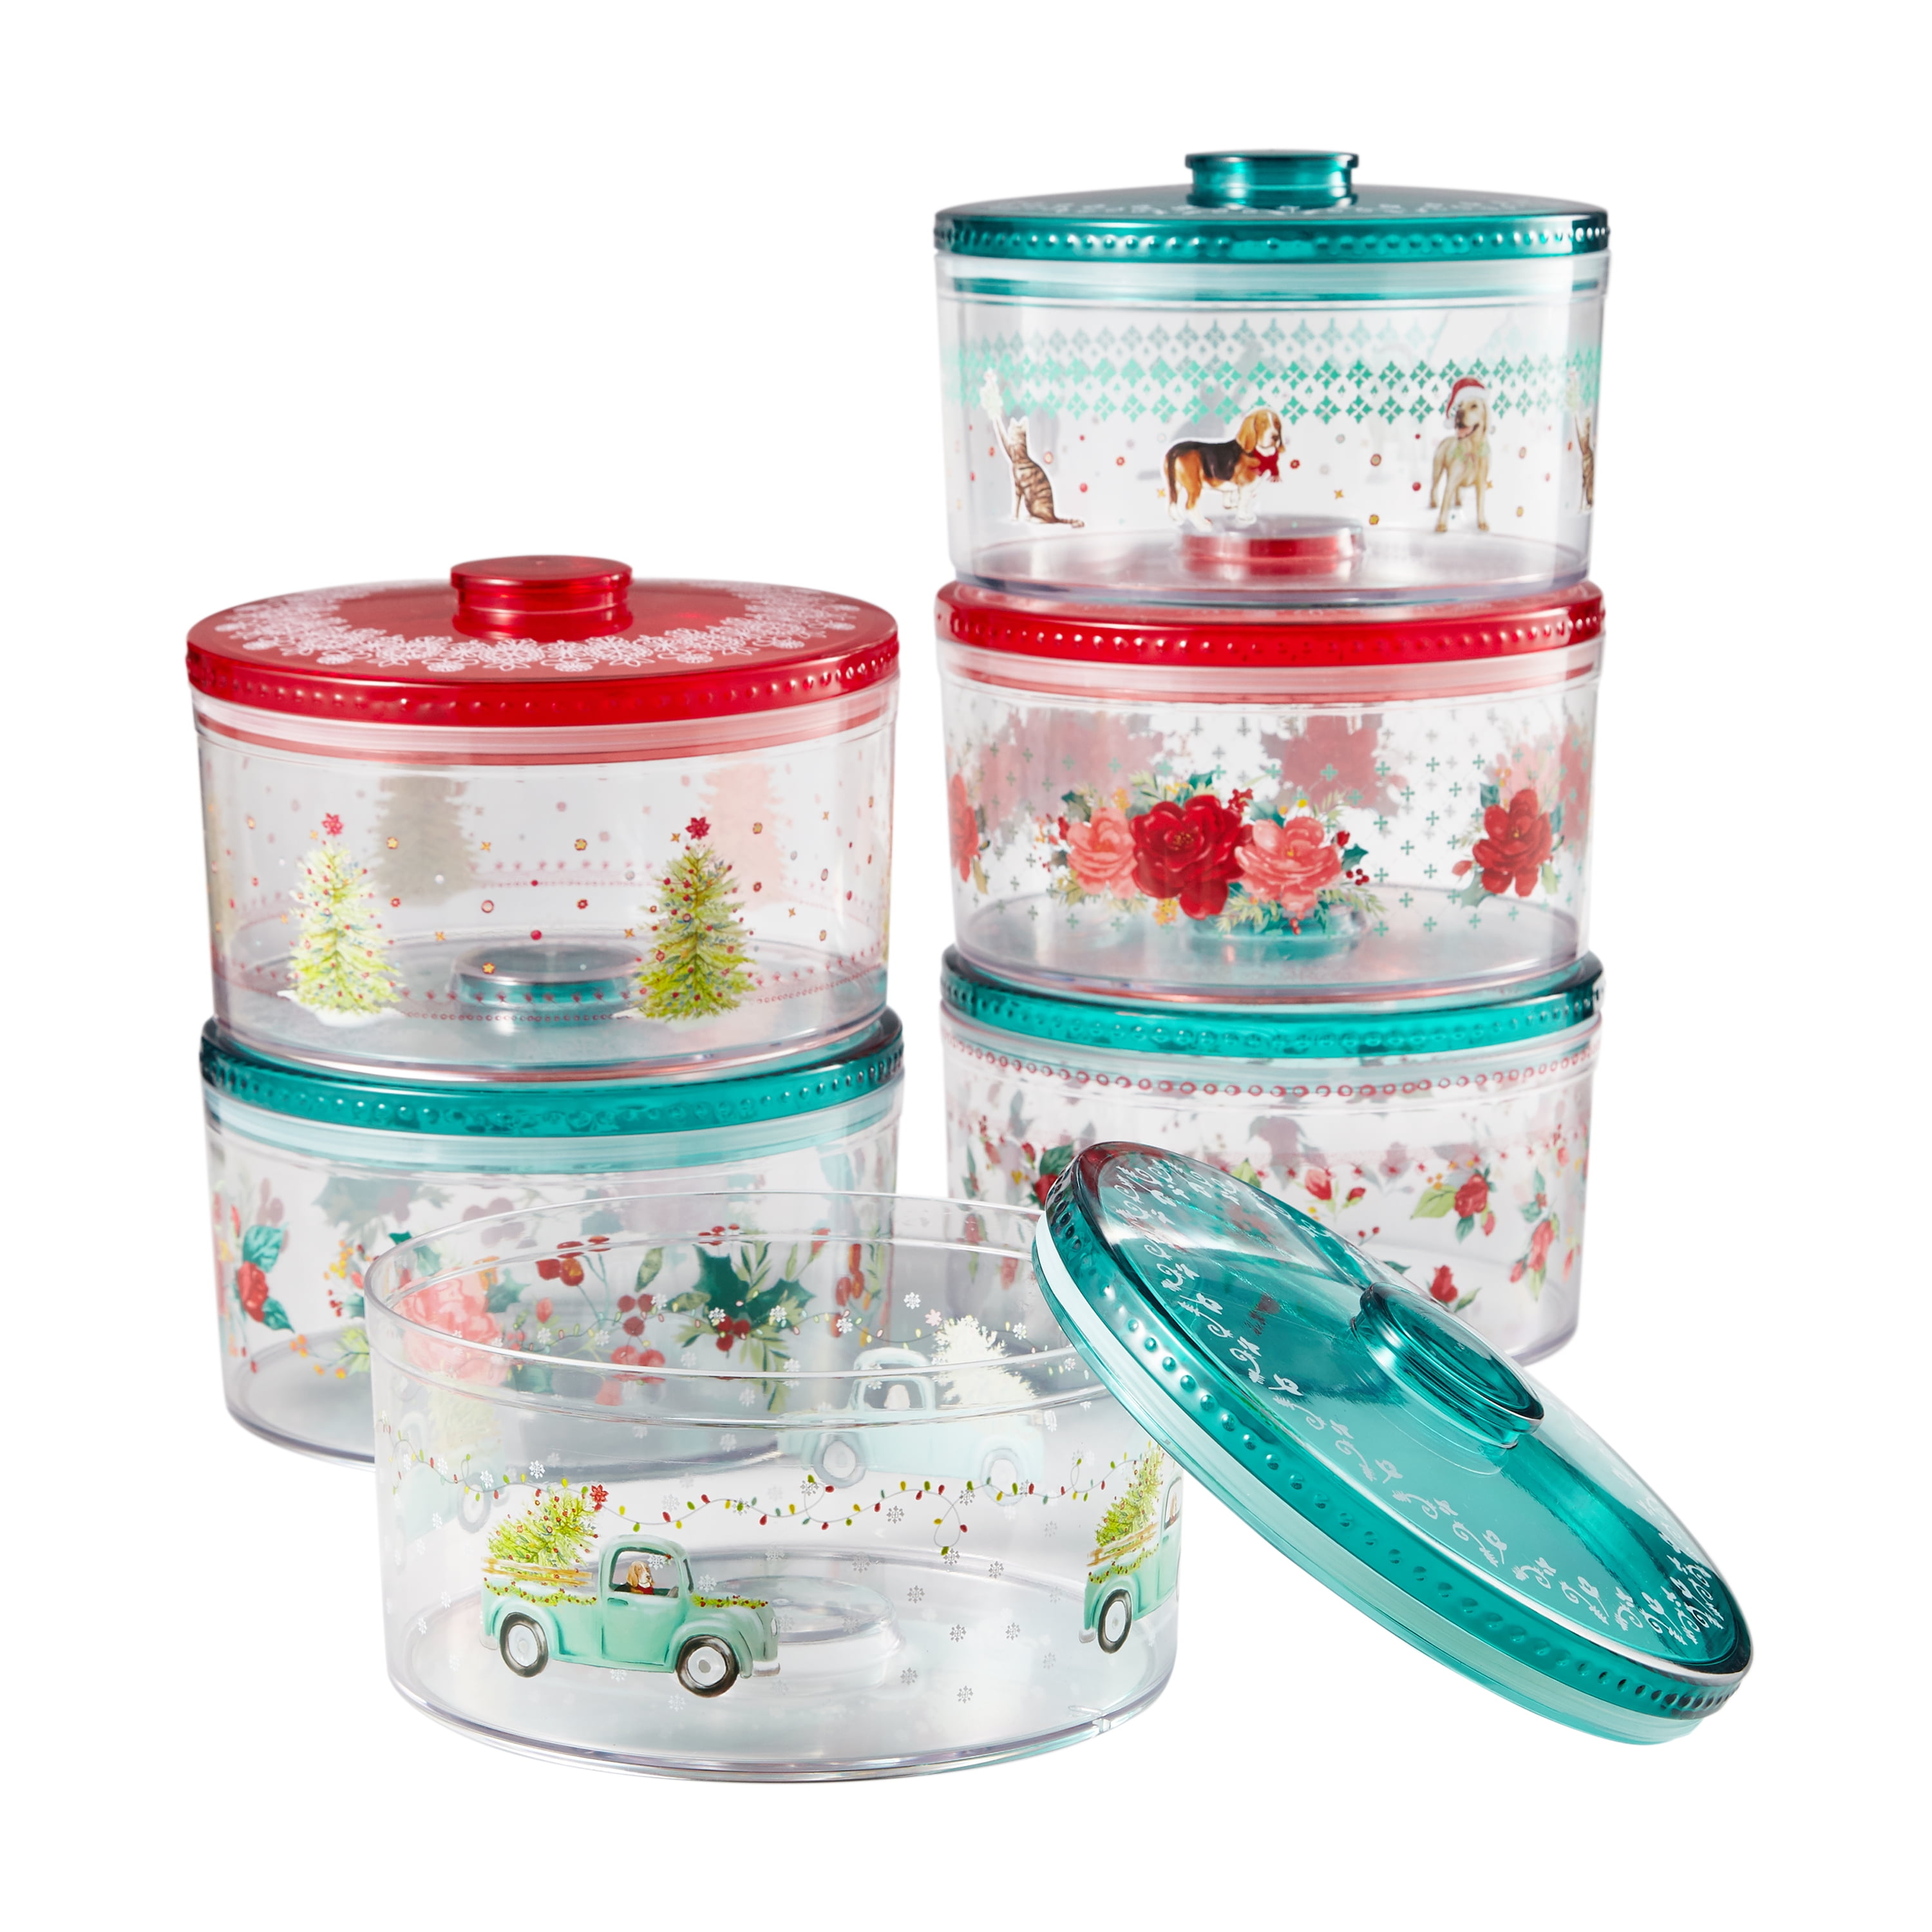 Cheer Collection Airtight Food Storage Containers, Set of 7 (Red)